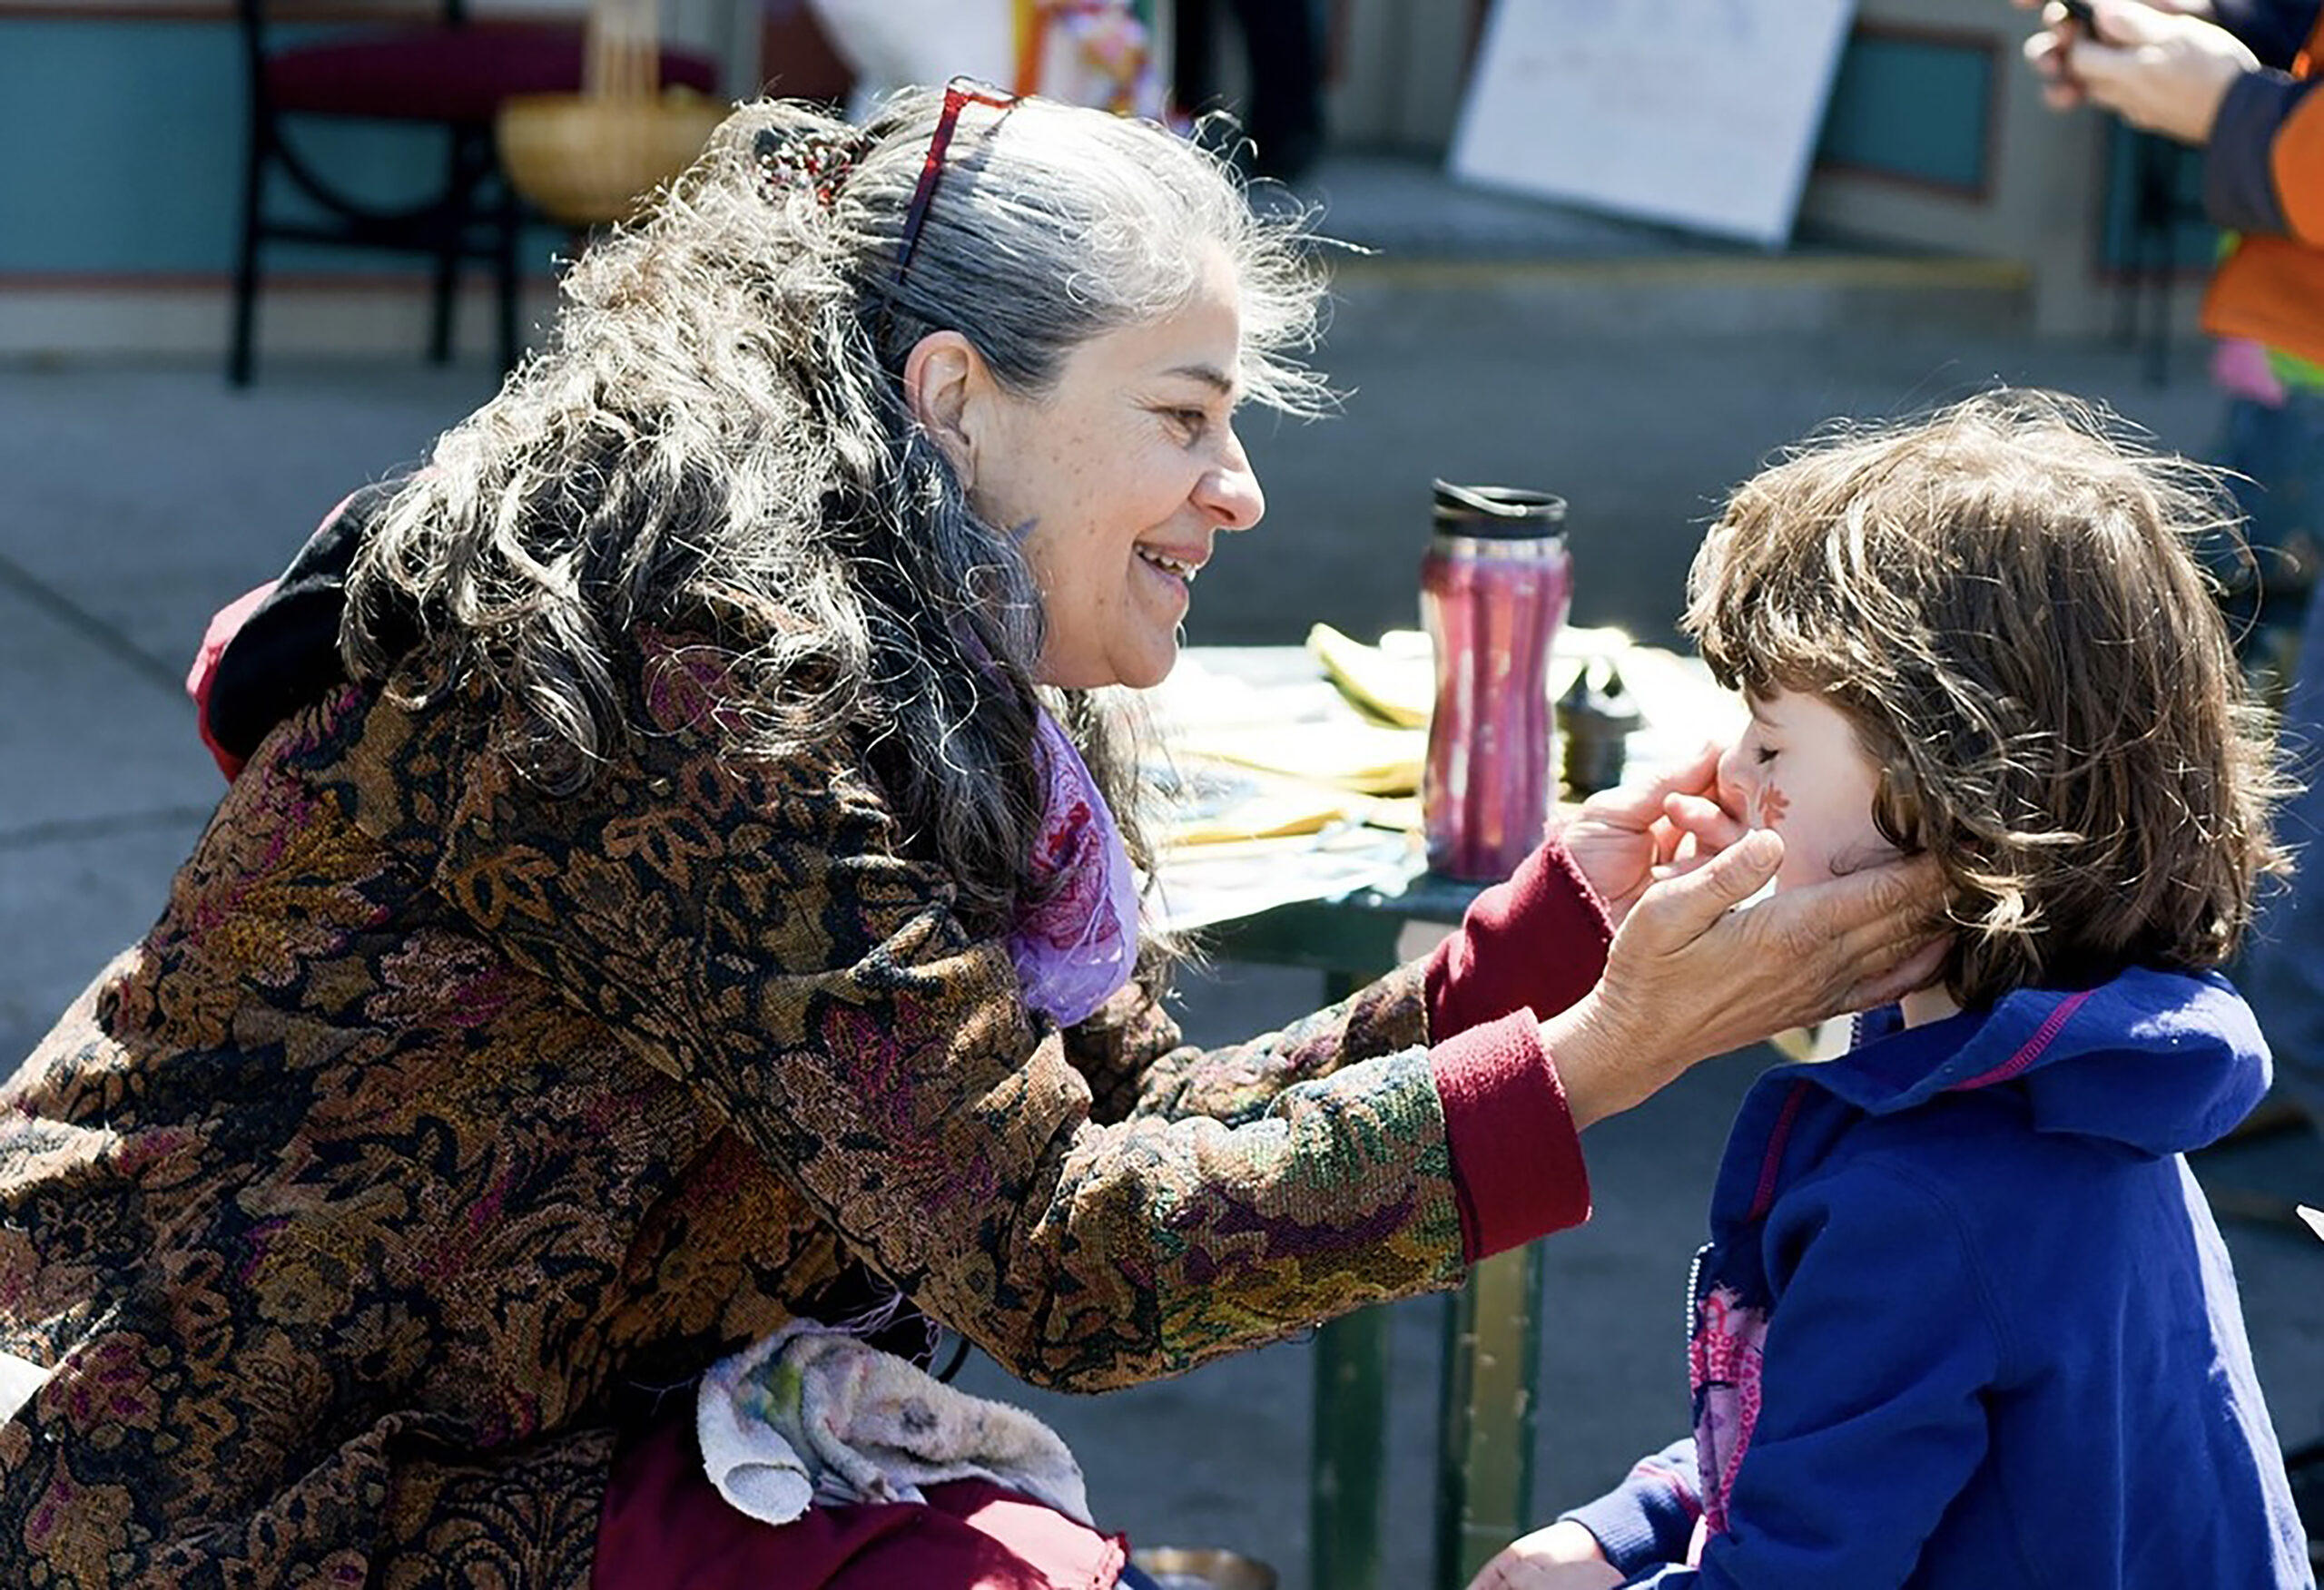 Community Pop-Up Art and Maker’s Market with Free Face-painting